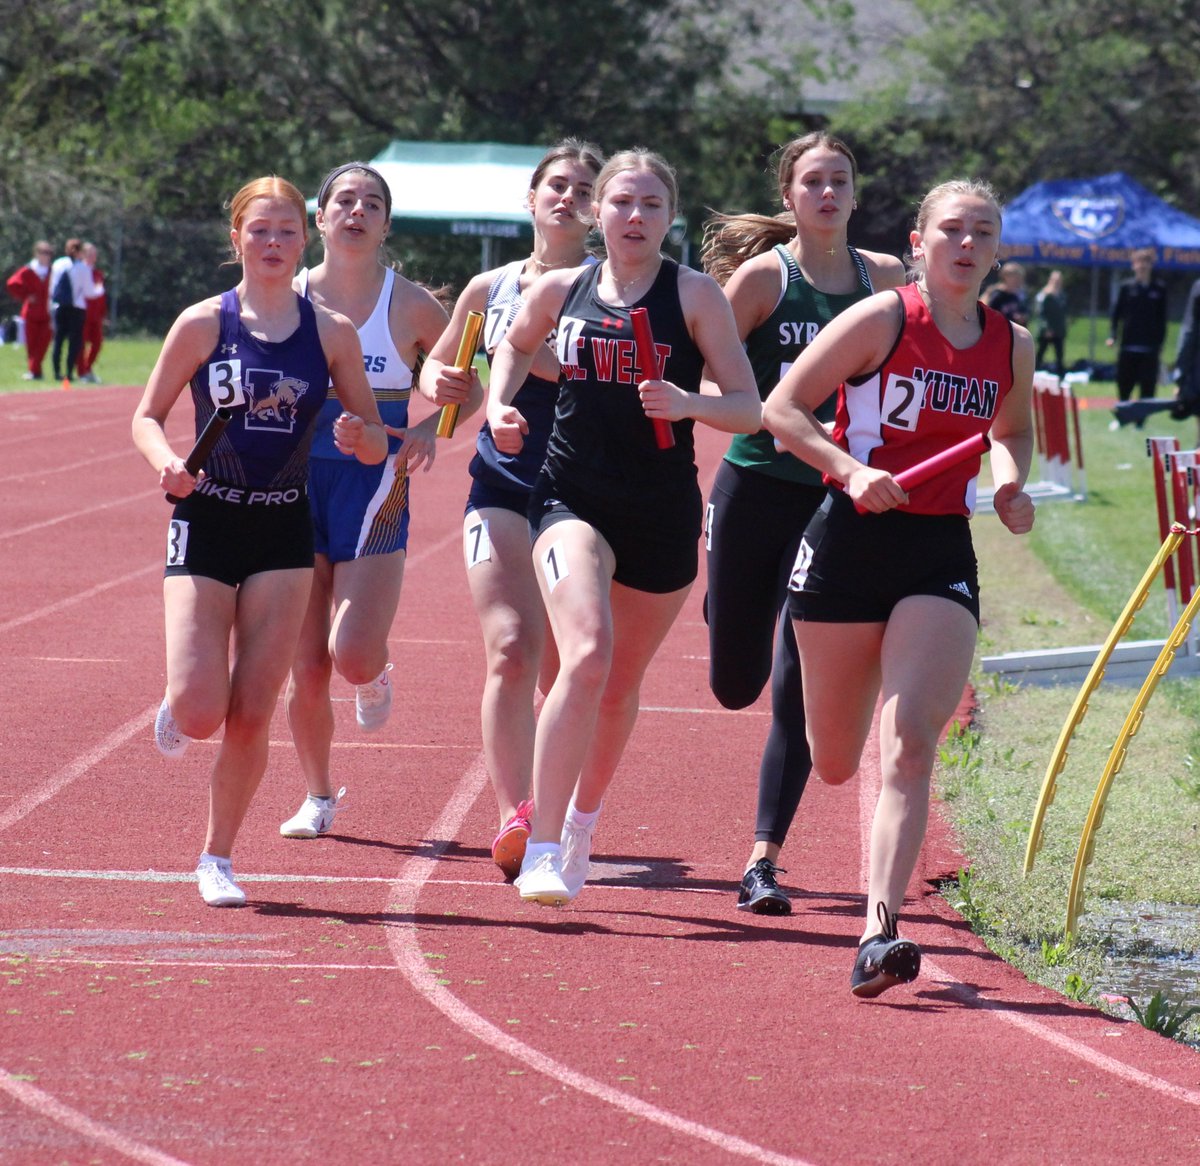 The Nebraska Capitol Conference meet was held at DC West today. The Falcons finished first on the boys' side with 113 points, while the girls placed fourth with 70. #nebpreps